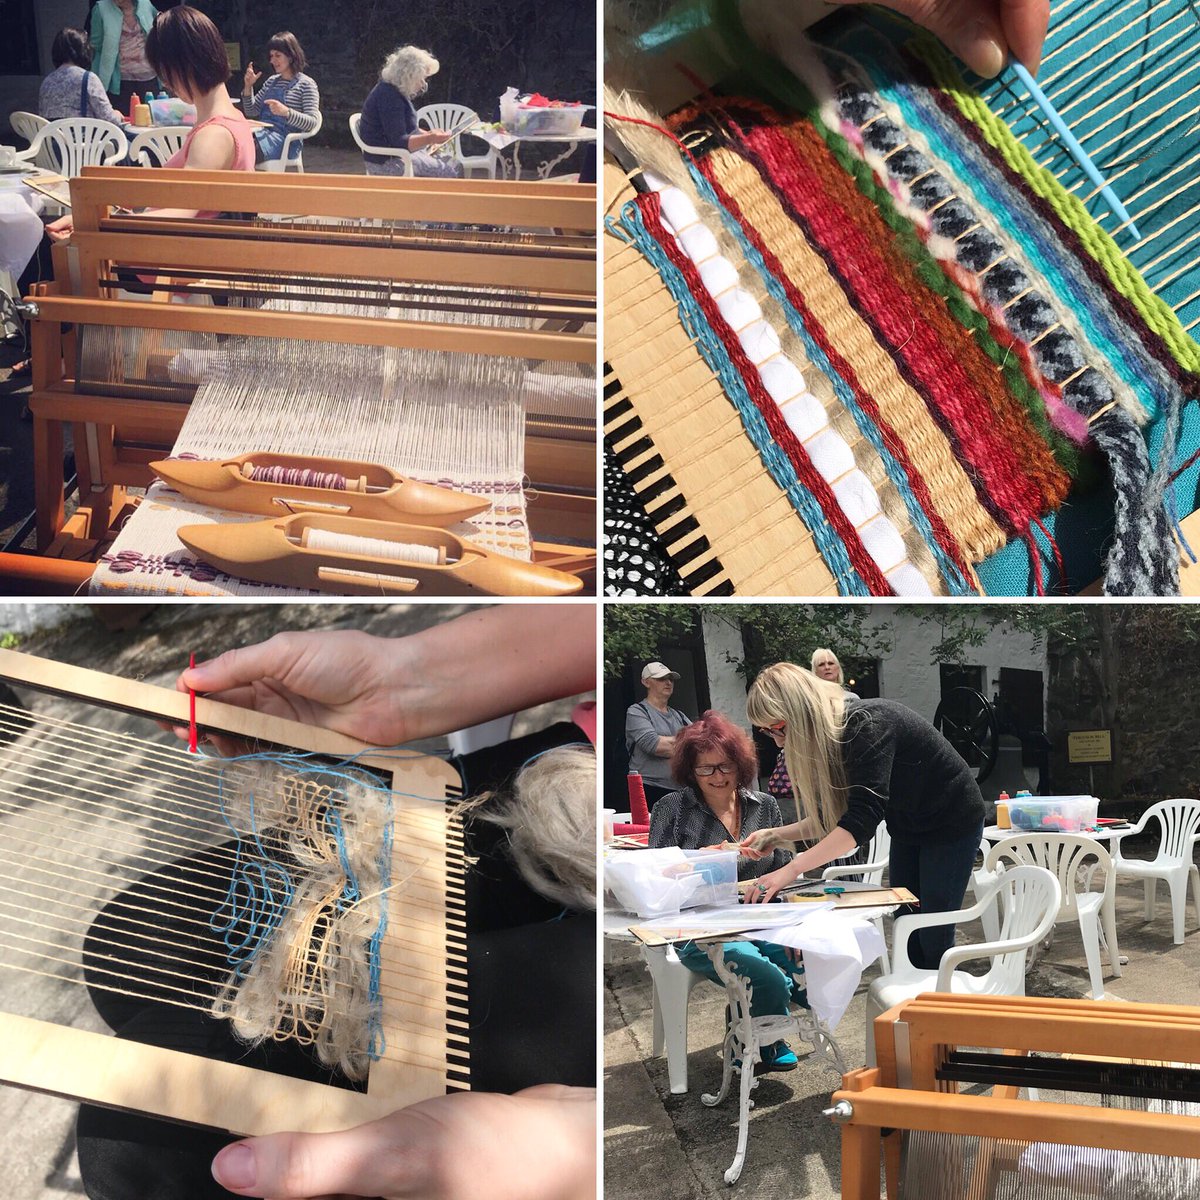 Thank you to all of our excellent weavers and visitors @smashotcottages in the very sunny courtyard garden 🌞🌿our next workshop will be on #smashotday on Saturday 7th of July! #weaving #workshop #weaver #loom #smashotcottages #paisley #textiles #heritage #paisleyis #thcars2